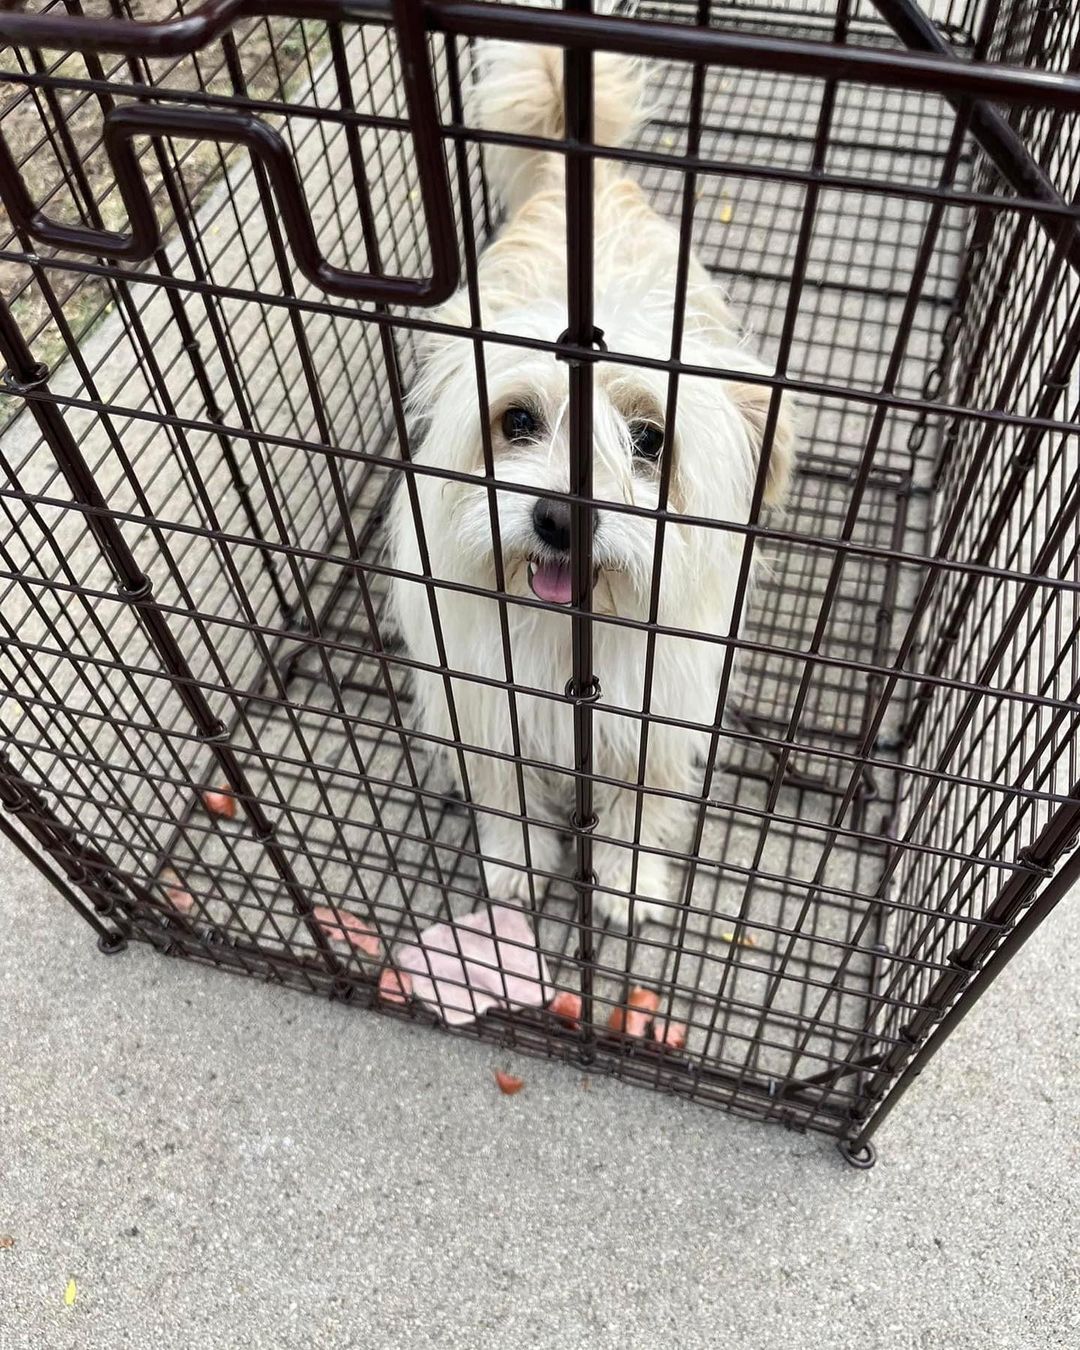 white dog looking up and smiling from inside a crate.